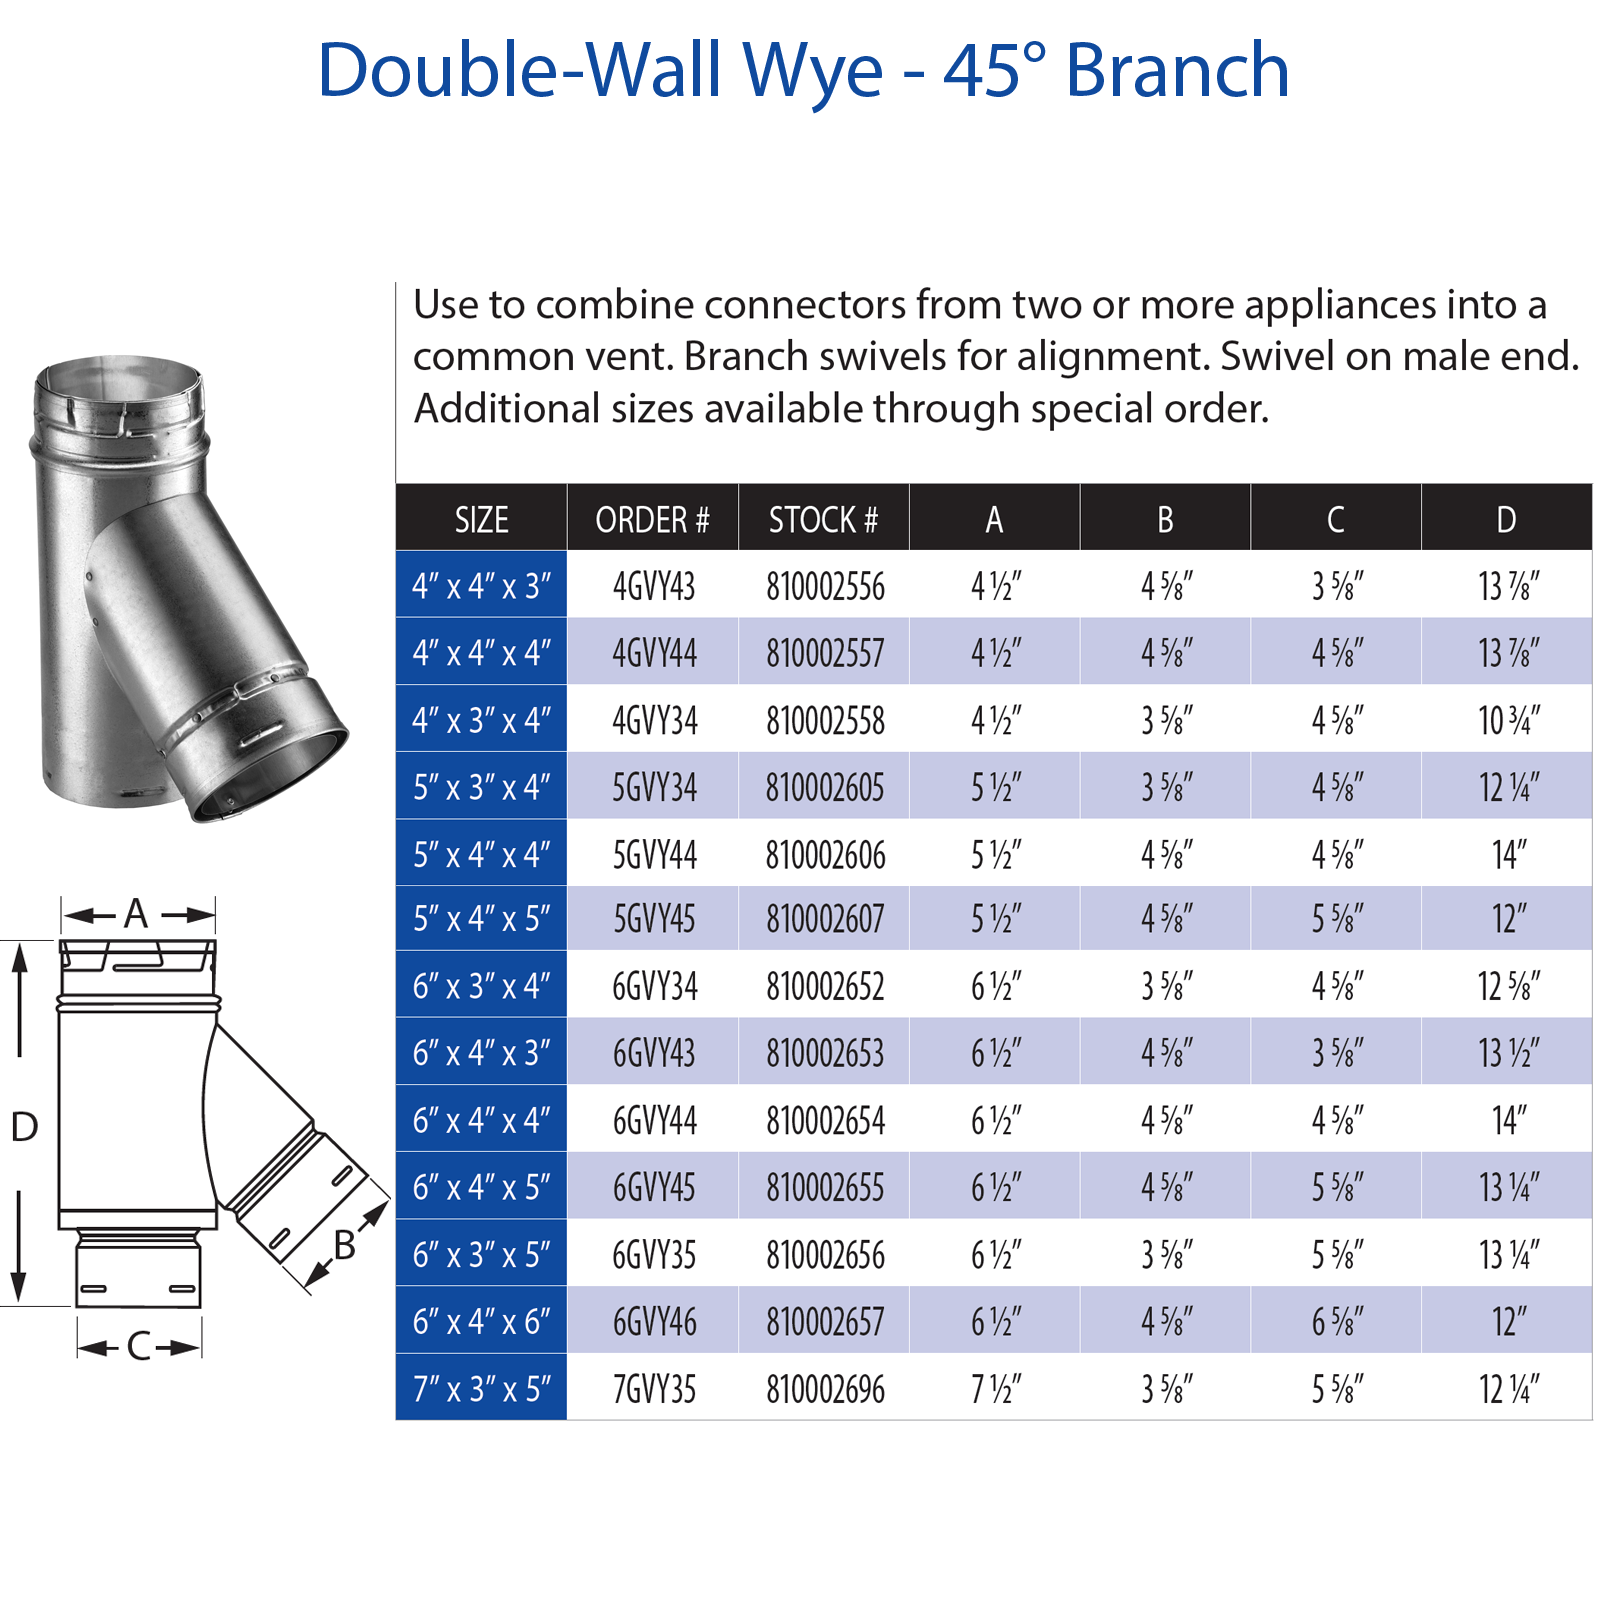 DuraVent Type B 6" x 4" x 4" Double-Wall WYE - 45 Degree Br | 6GVY44